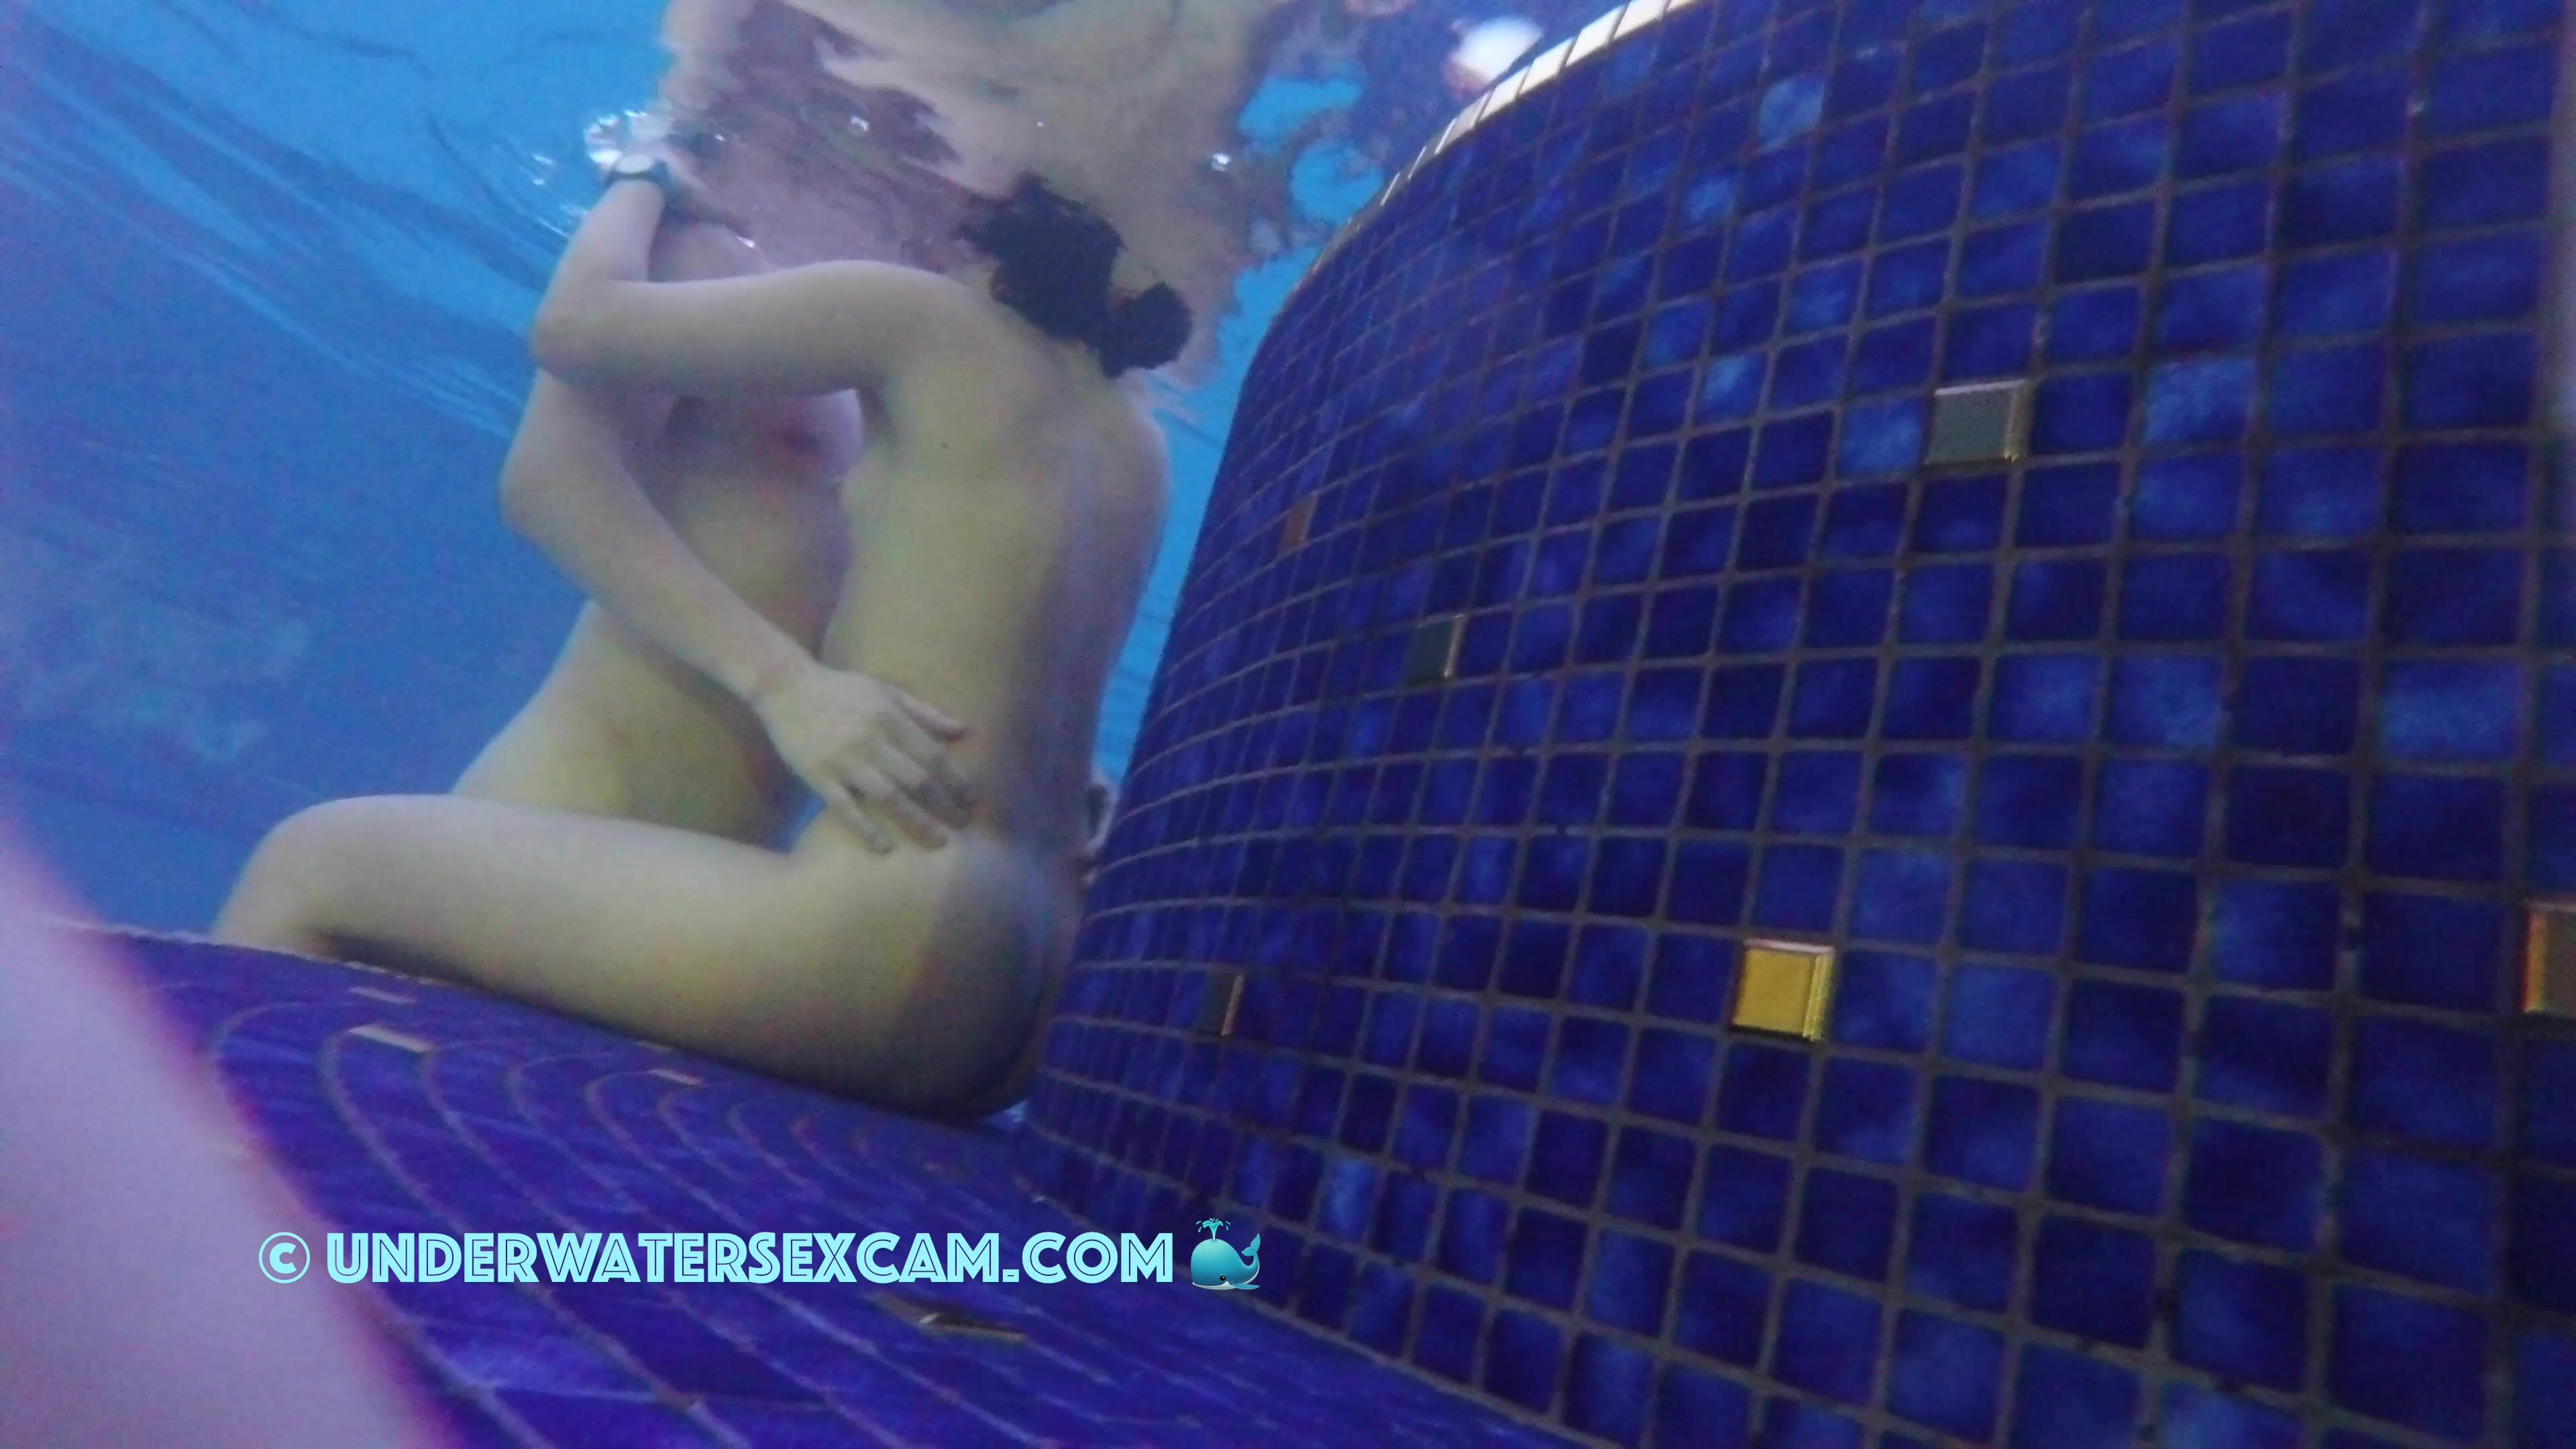 This underwater bench is a good place for fucking